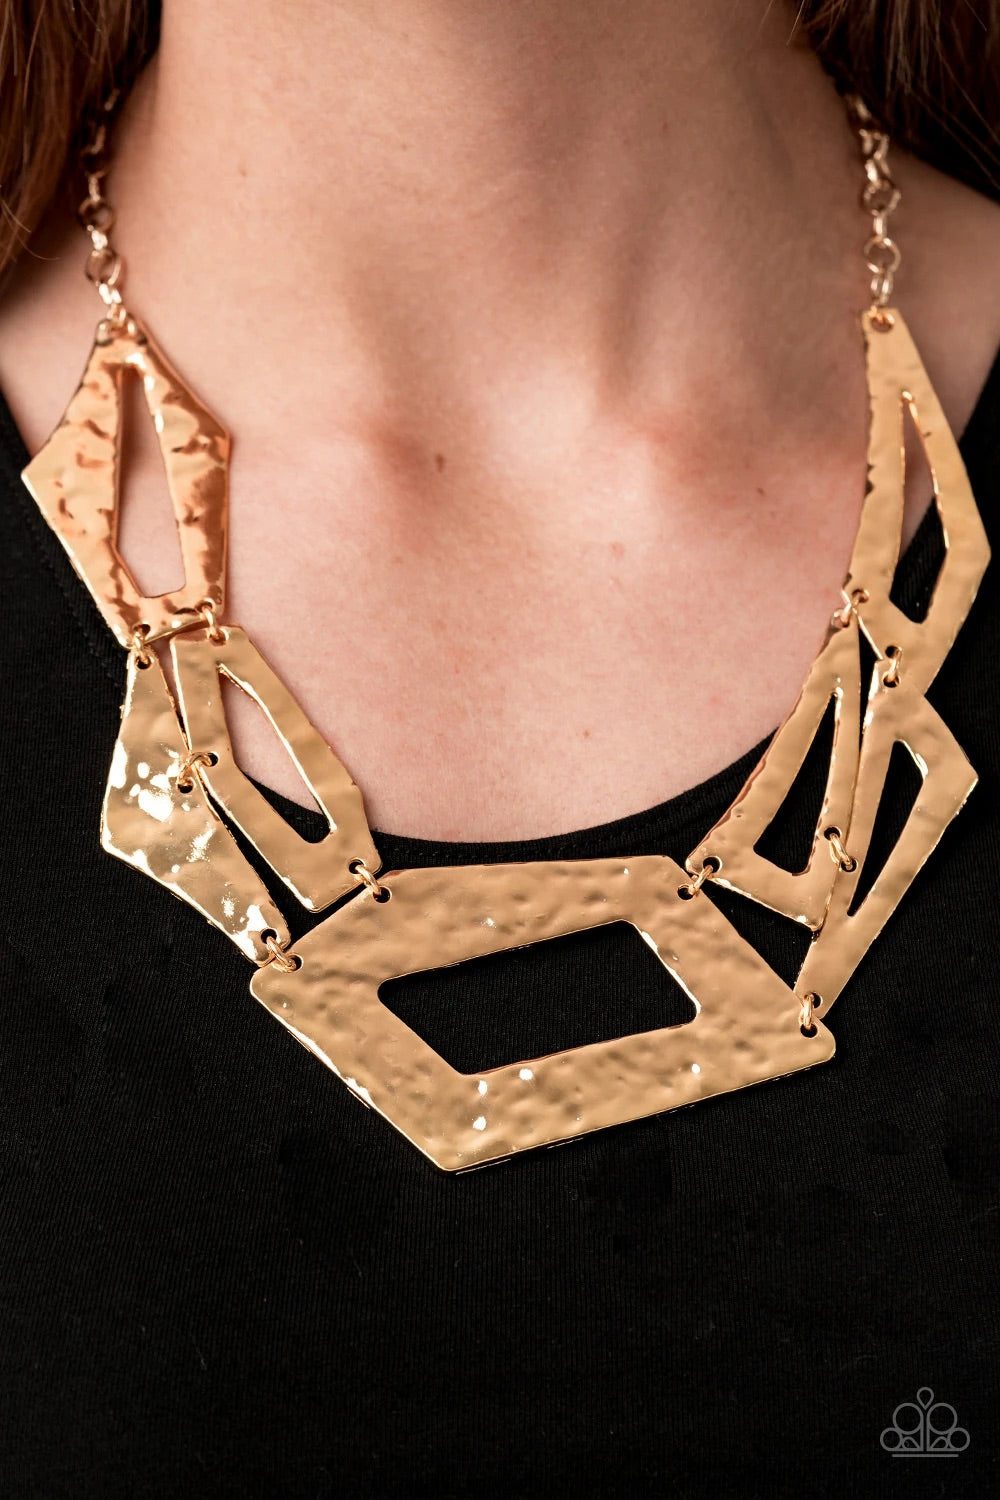 Paparazzi Jewelry Necklace Break The Mold - Gold